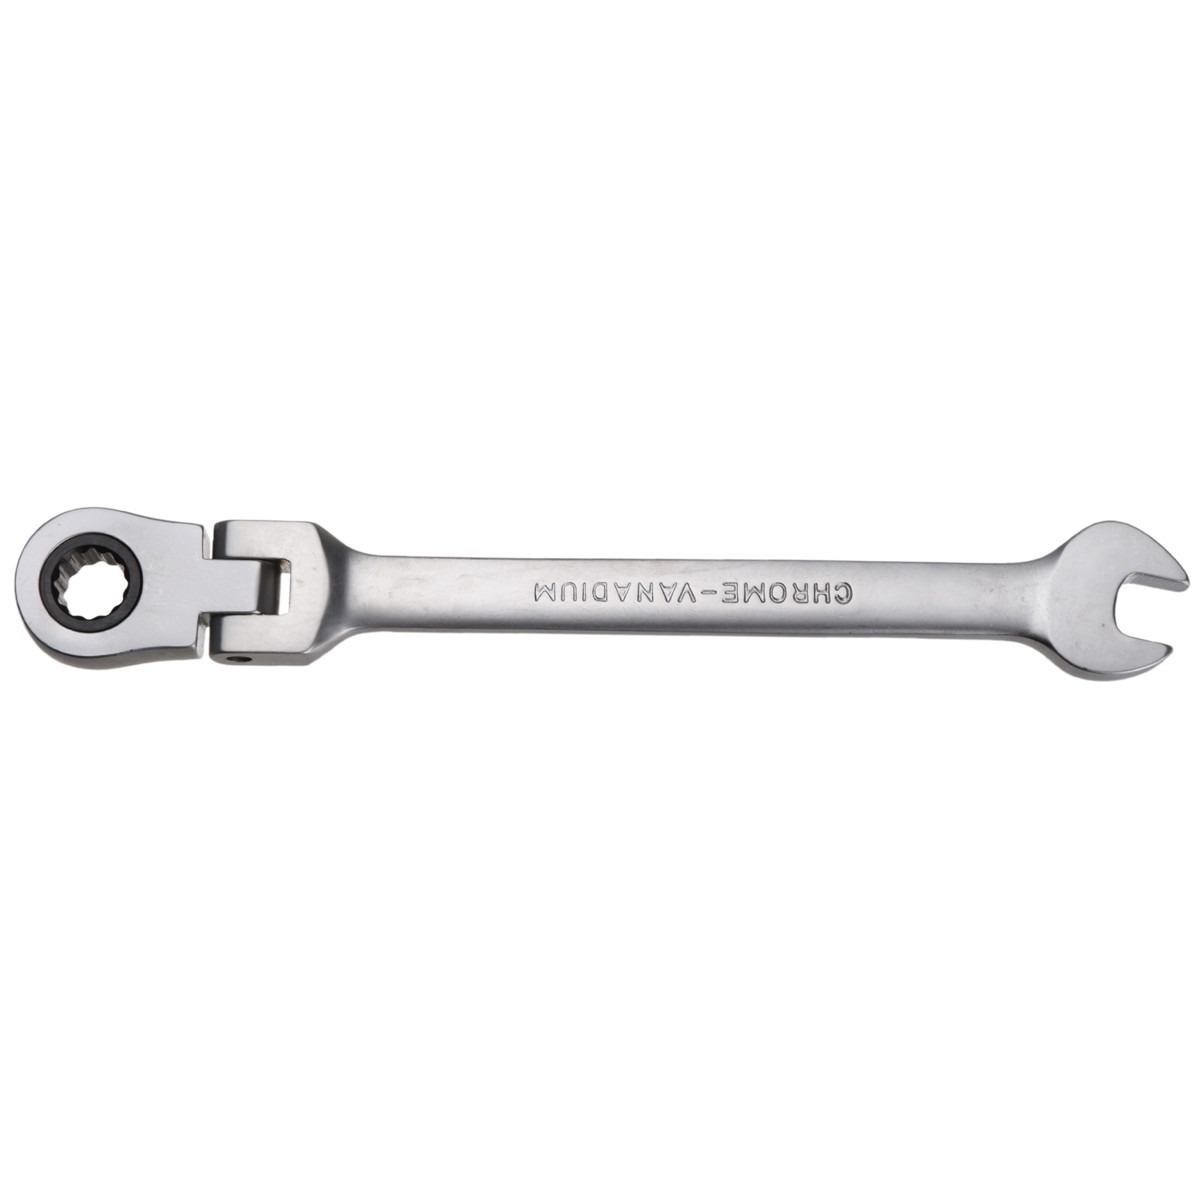 8mm-Reversible-Flexible-Head-Ratchet-Ratcheting-Spanner-Wrench-Socket-Wrenches-Nut-Tool-for-HomeGard-979973-7